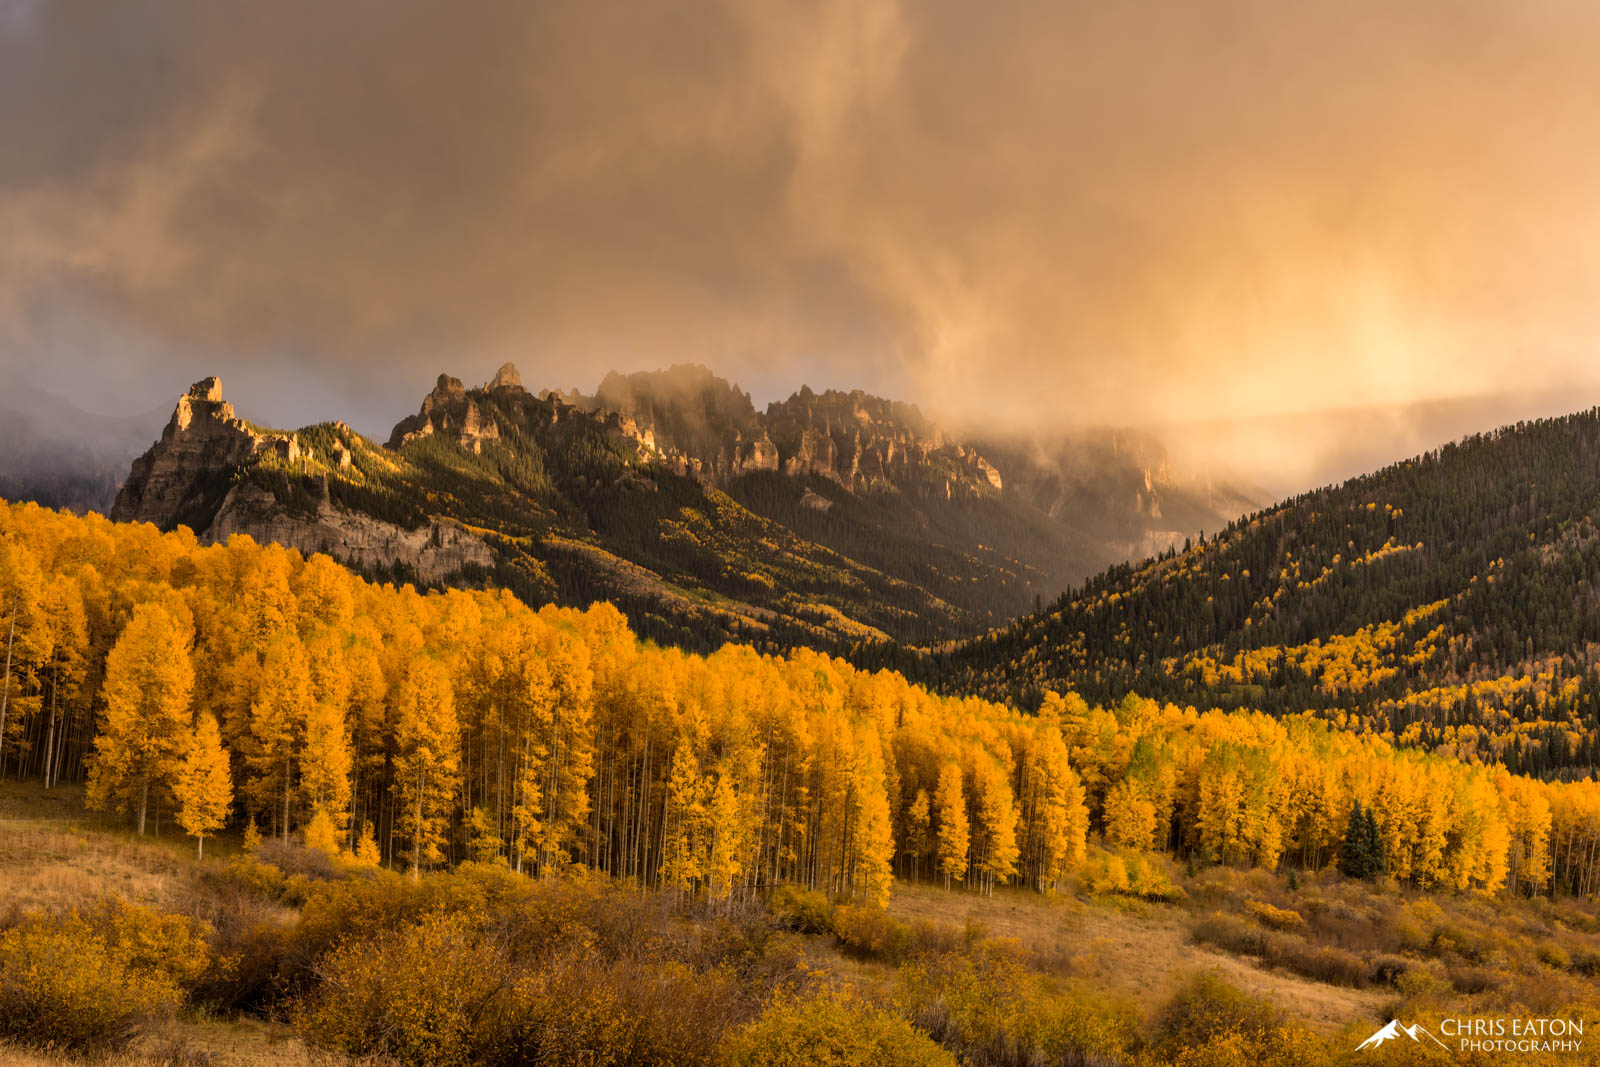 An unsettled sky is illuminated by sunset light over Turret Ridge in the Cimarron Range of the San Juan Mountains of Colorado...